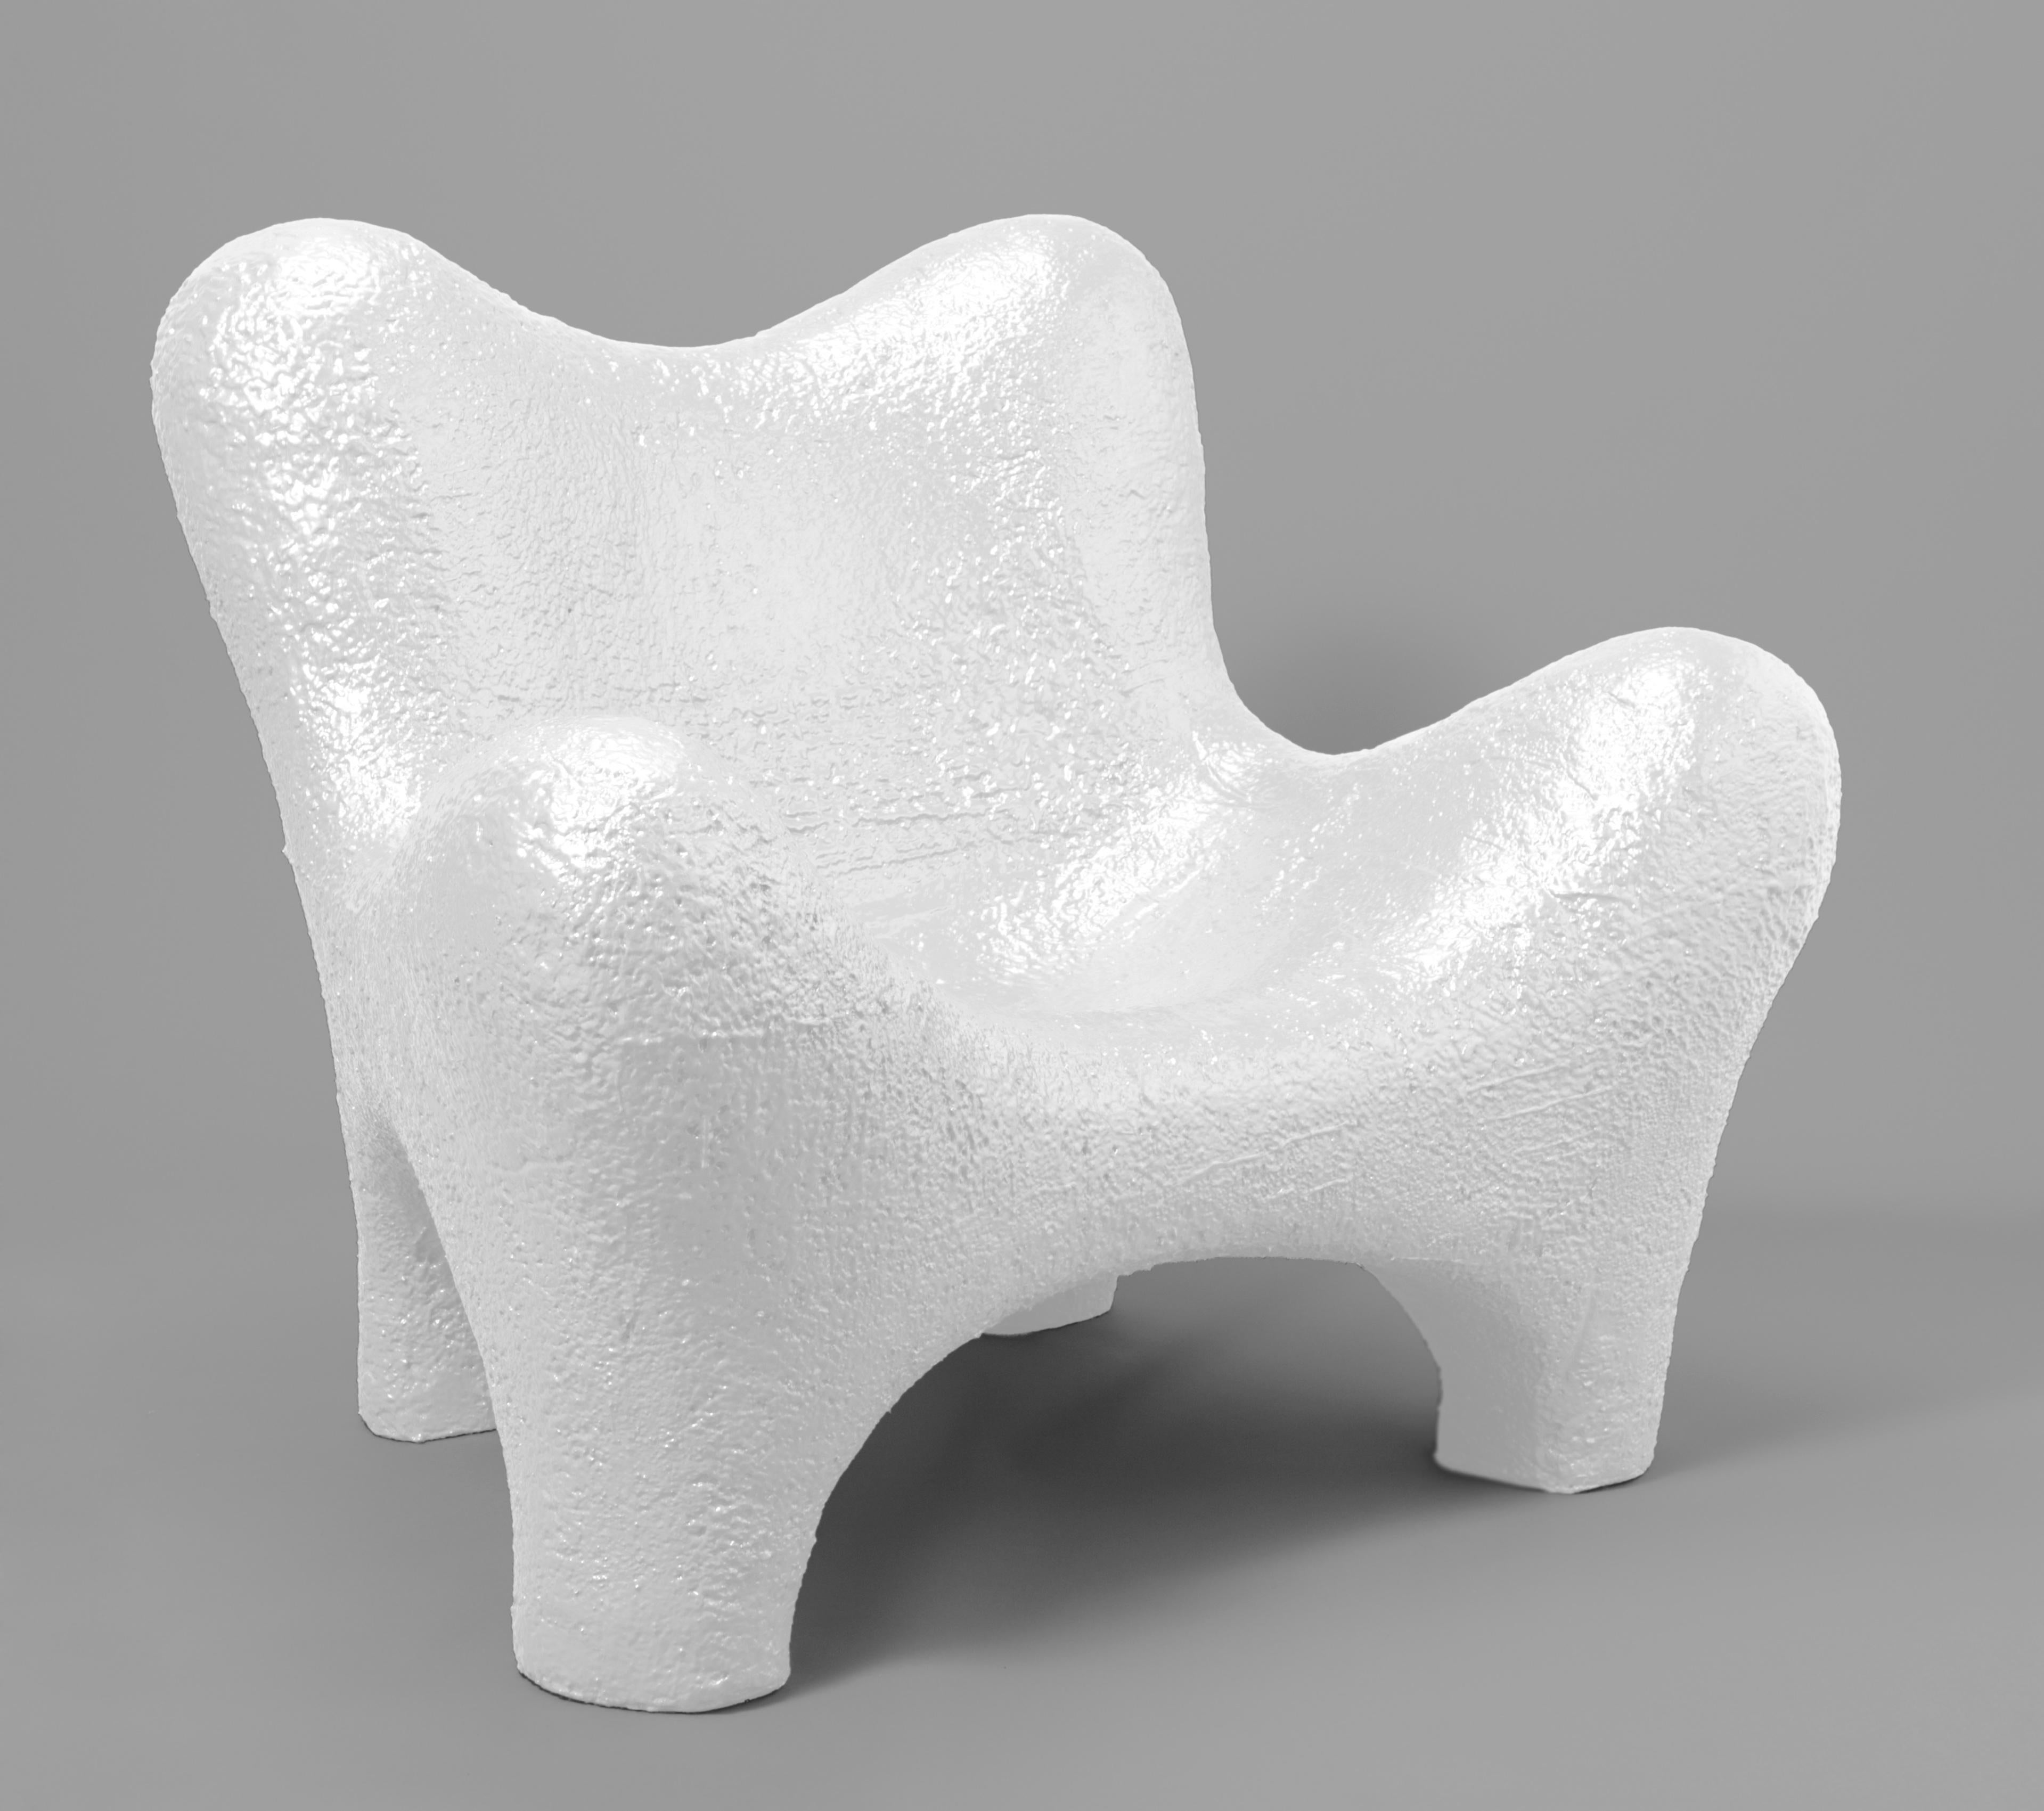 Fauteuil I by Philipp Aduatz
2009
Edition of 5 + 3
Dimensions: 120 x 95 x 95 cm
Materials: polystyrene foam, polymer coating and polyurethane lacquer

The main purpose of Philipp Aduatz’ Fauteuil I is to function as a prototype for a smaller